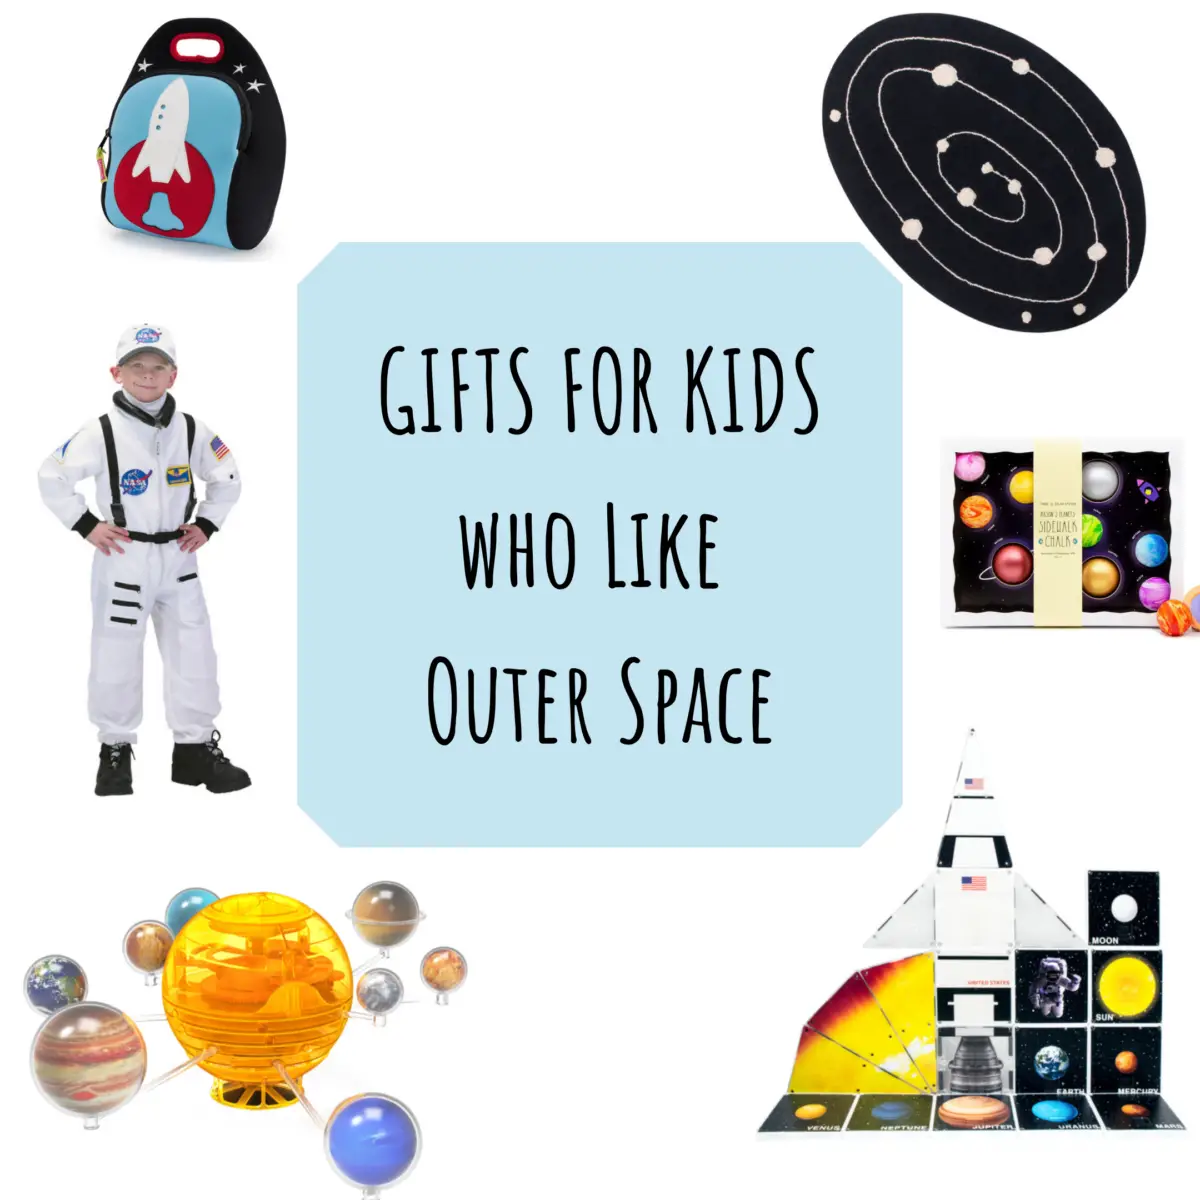 GIFTS FOR KIDS WHO LIKE OUTER SPACE